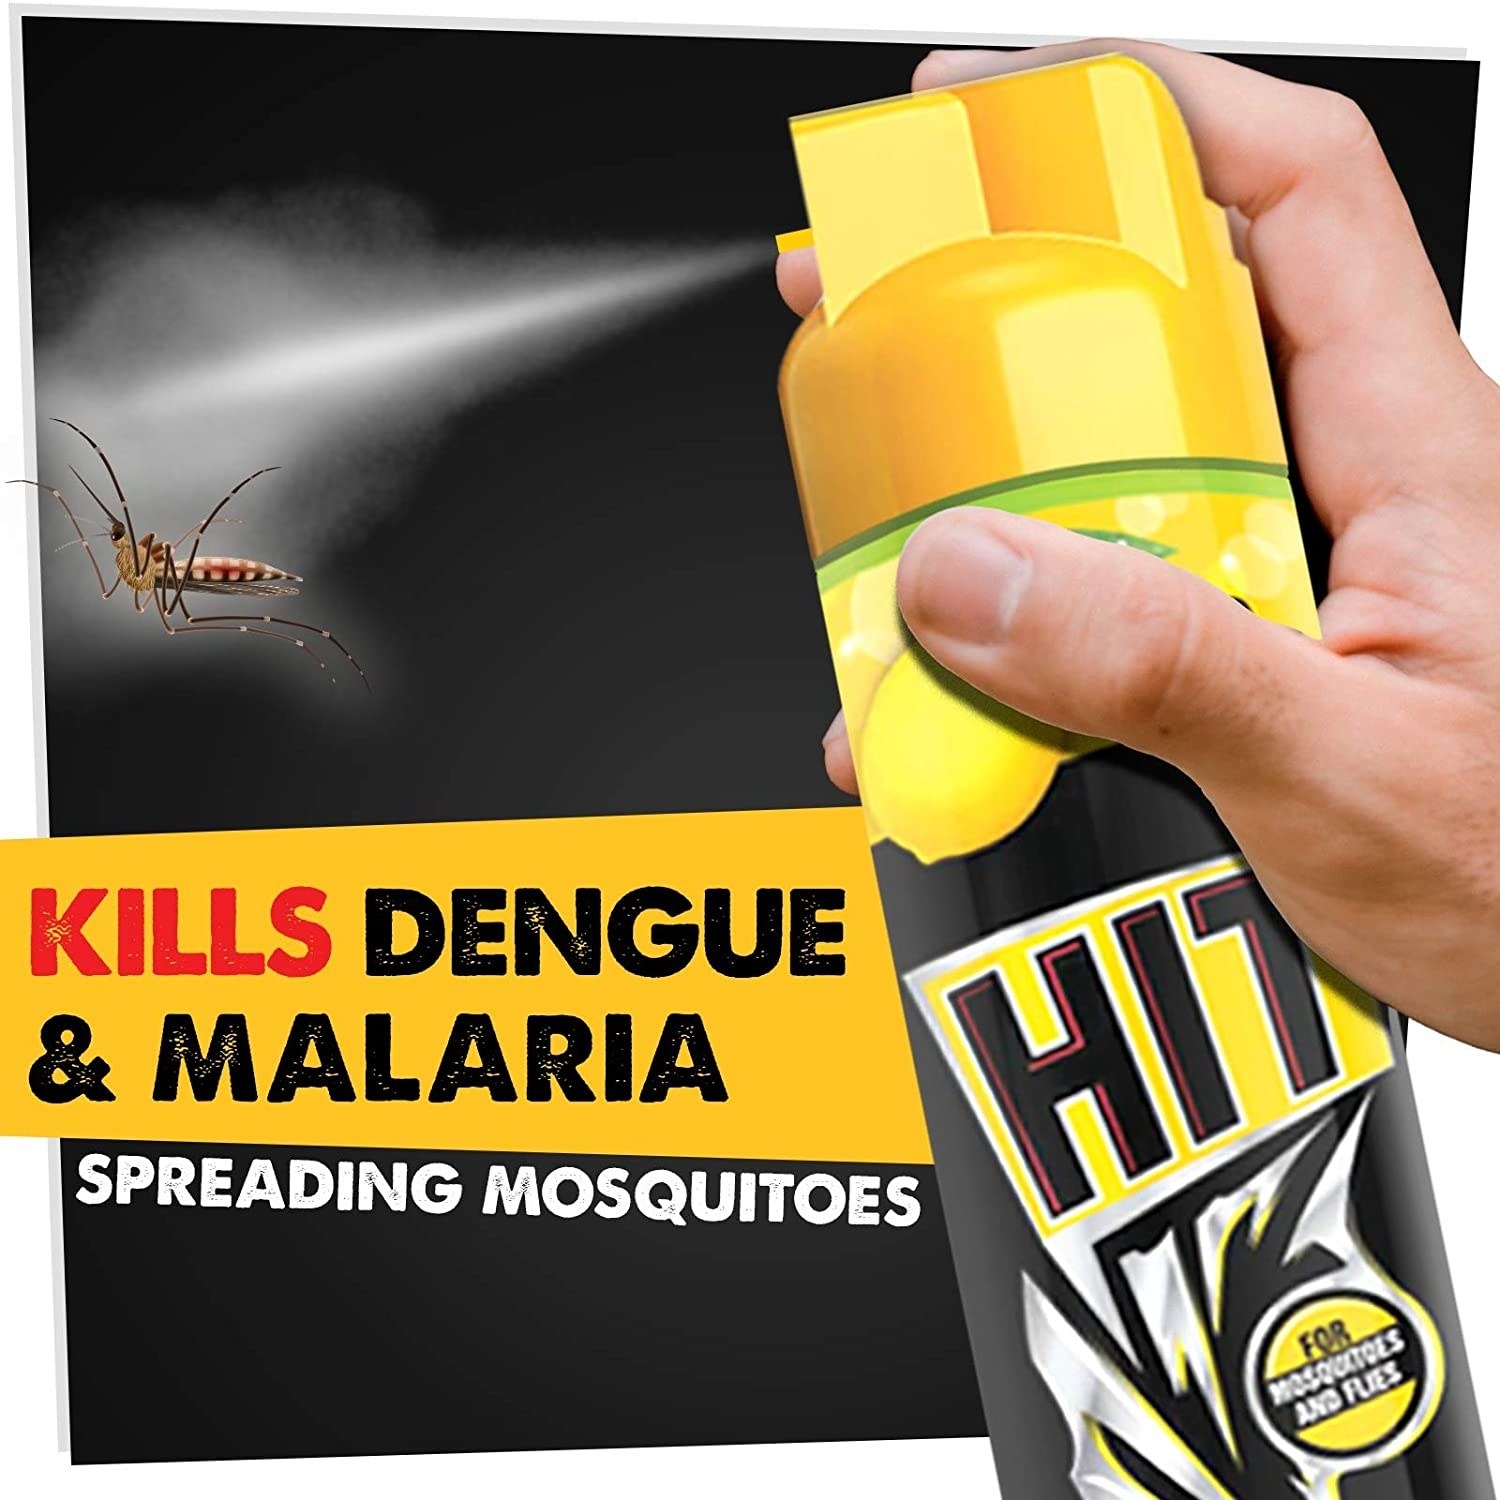 A person spraying a mosquito with HIT bug spray.